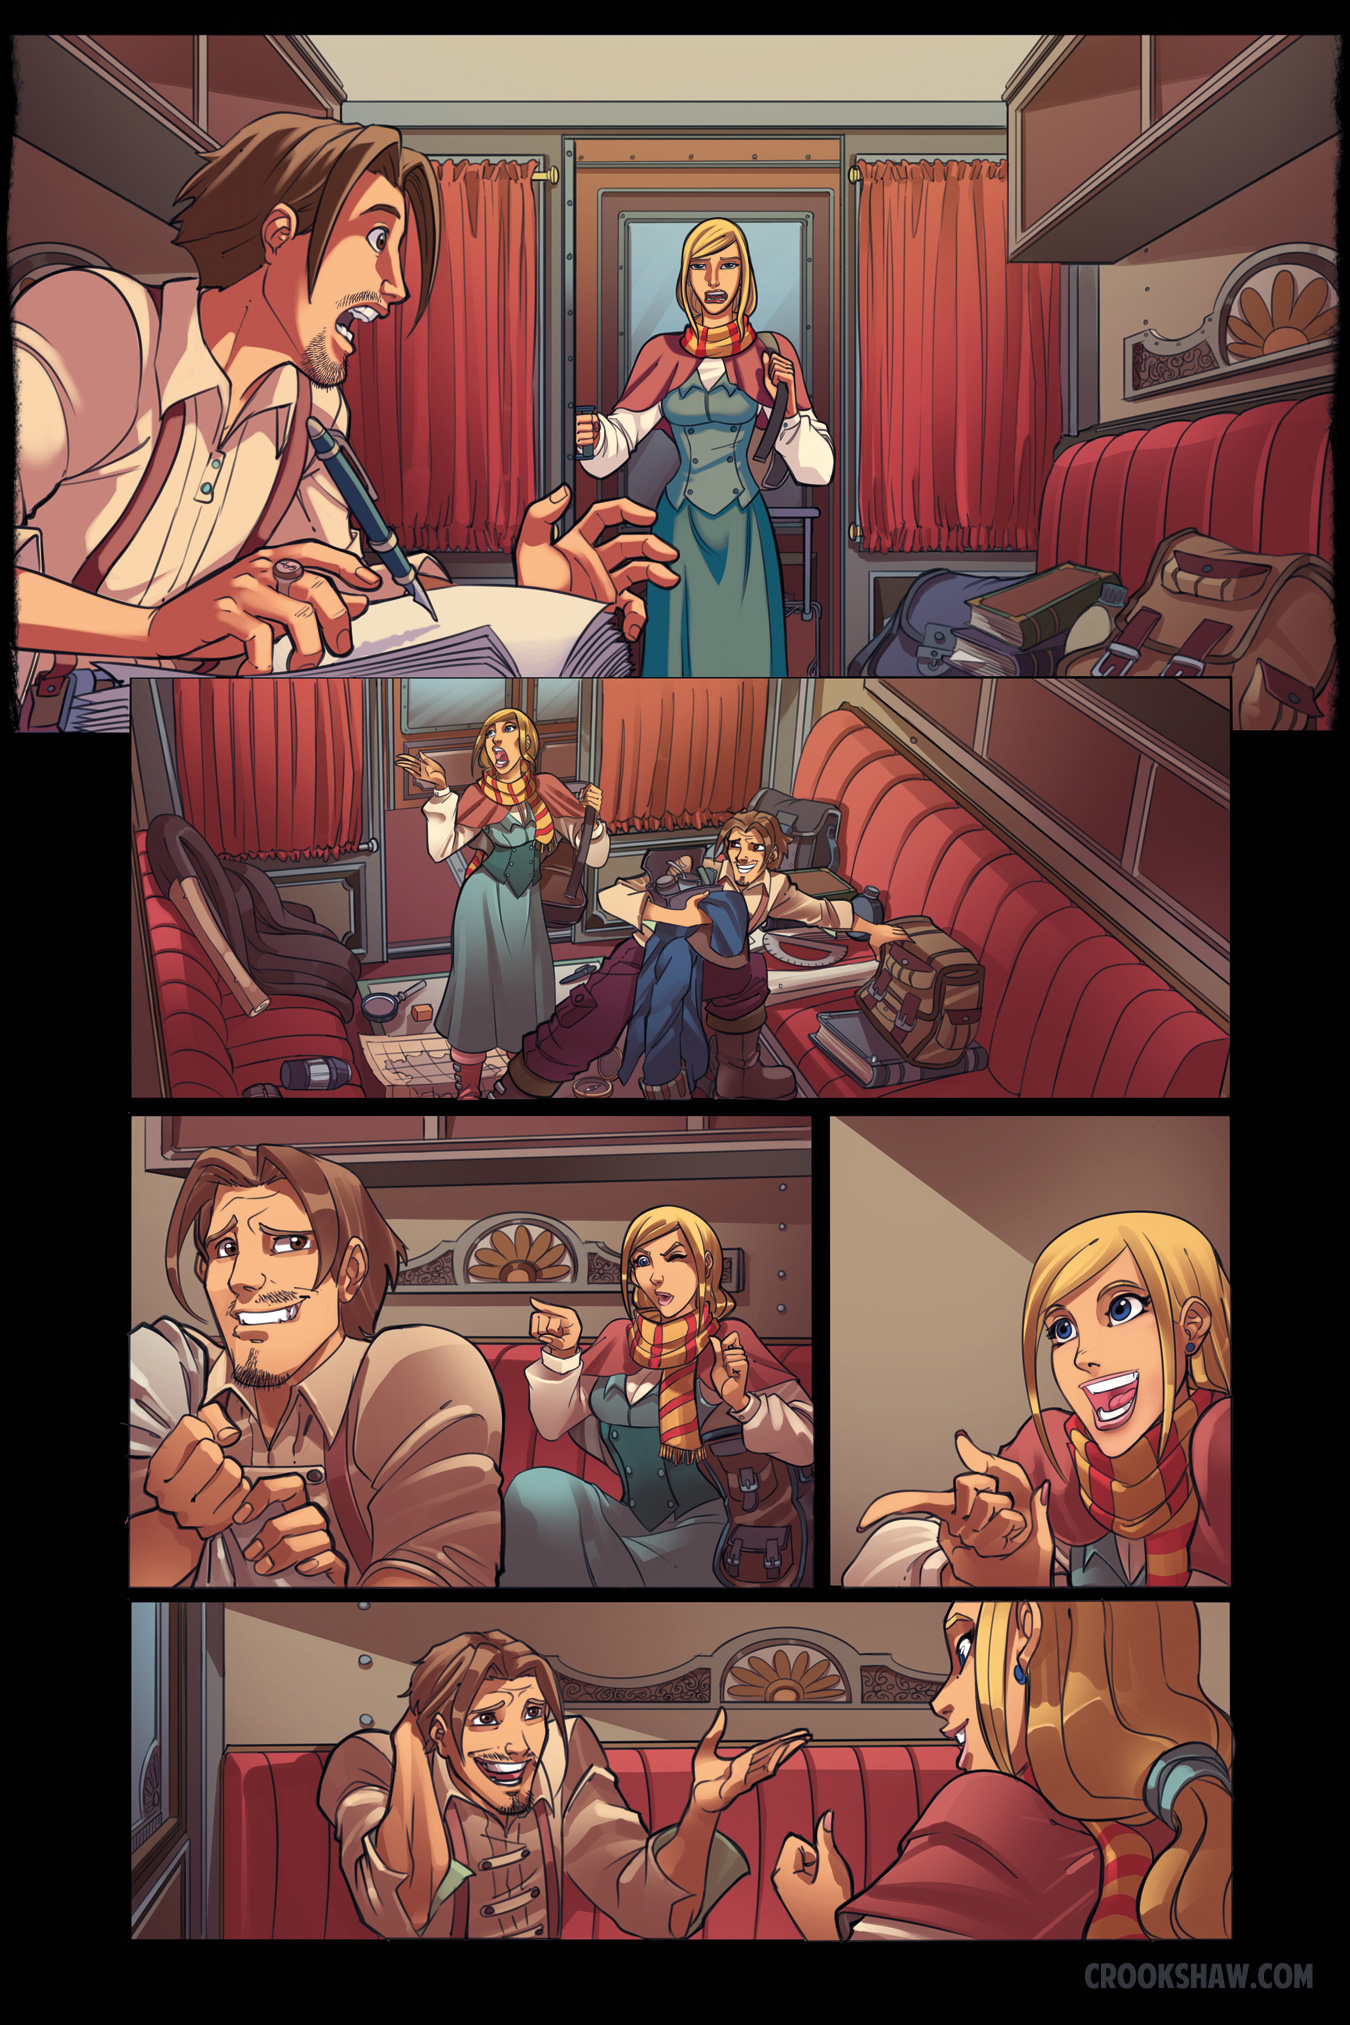 Sample page TBD. This page is currently unreleased but free to distribute.